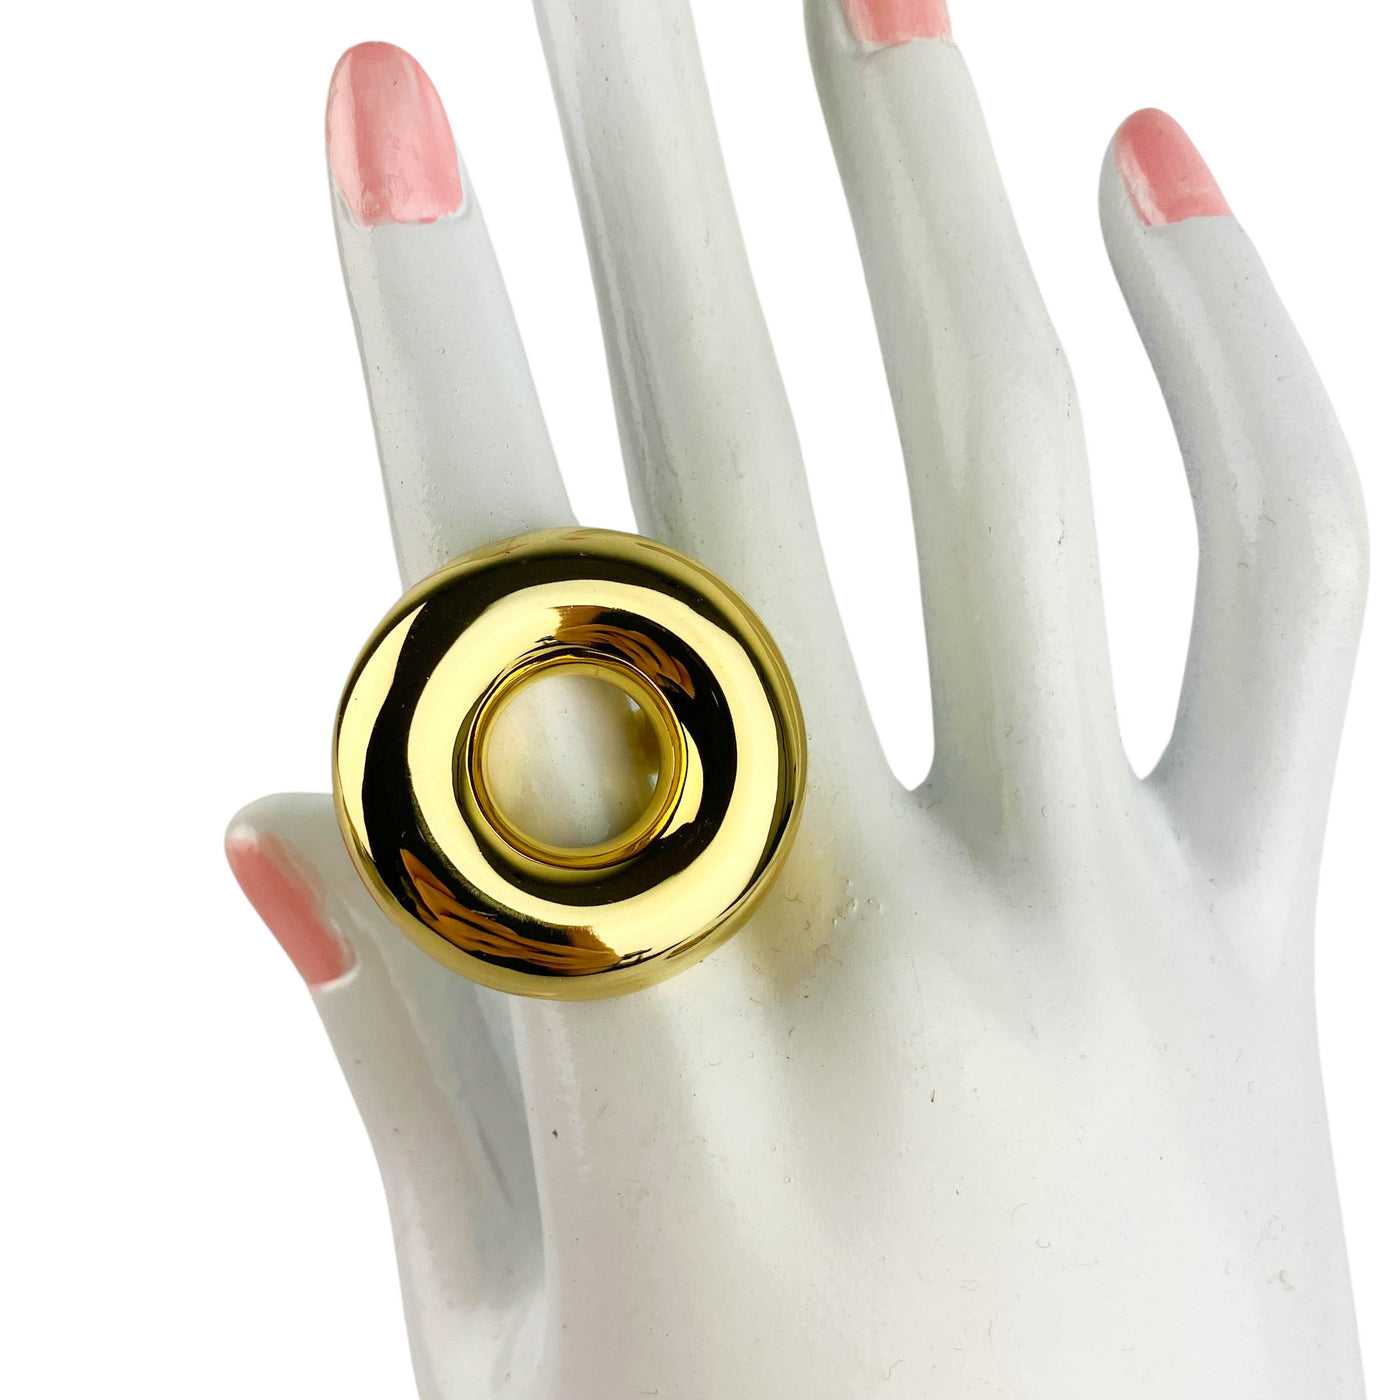 Exclusive Designer Sixnfive Donut Ring in Gold - Discounts on Exclusive Designer at UAL